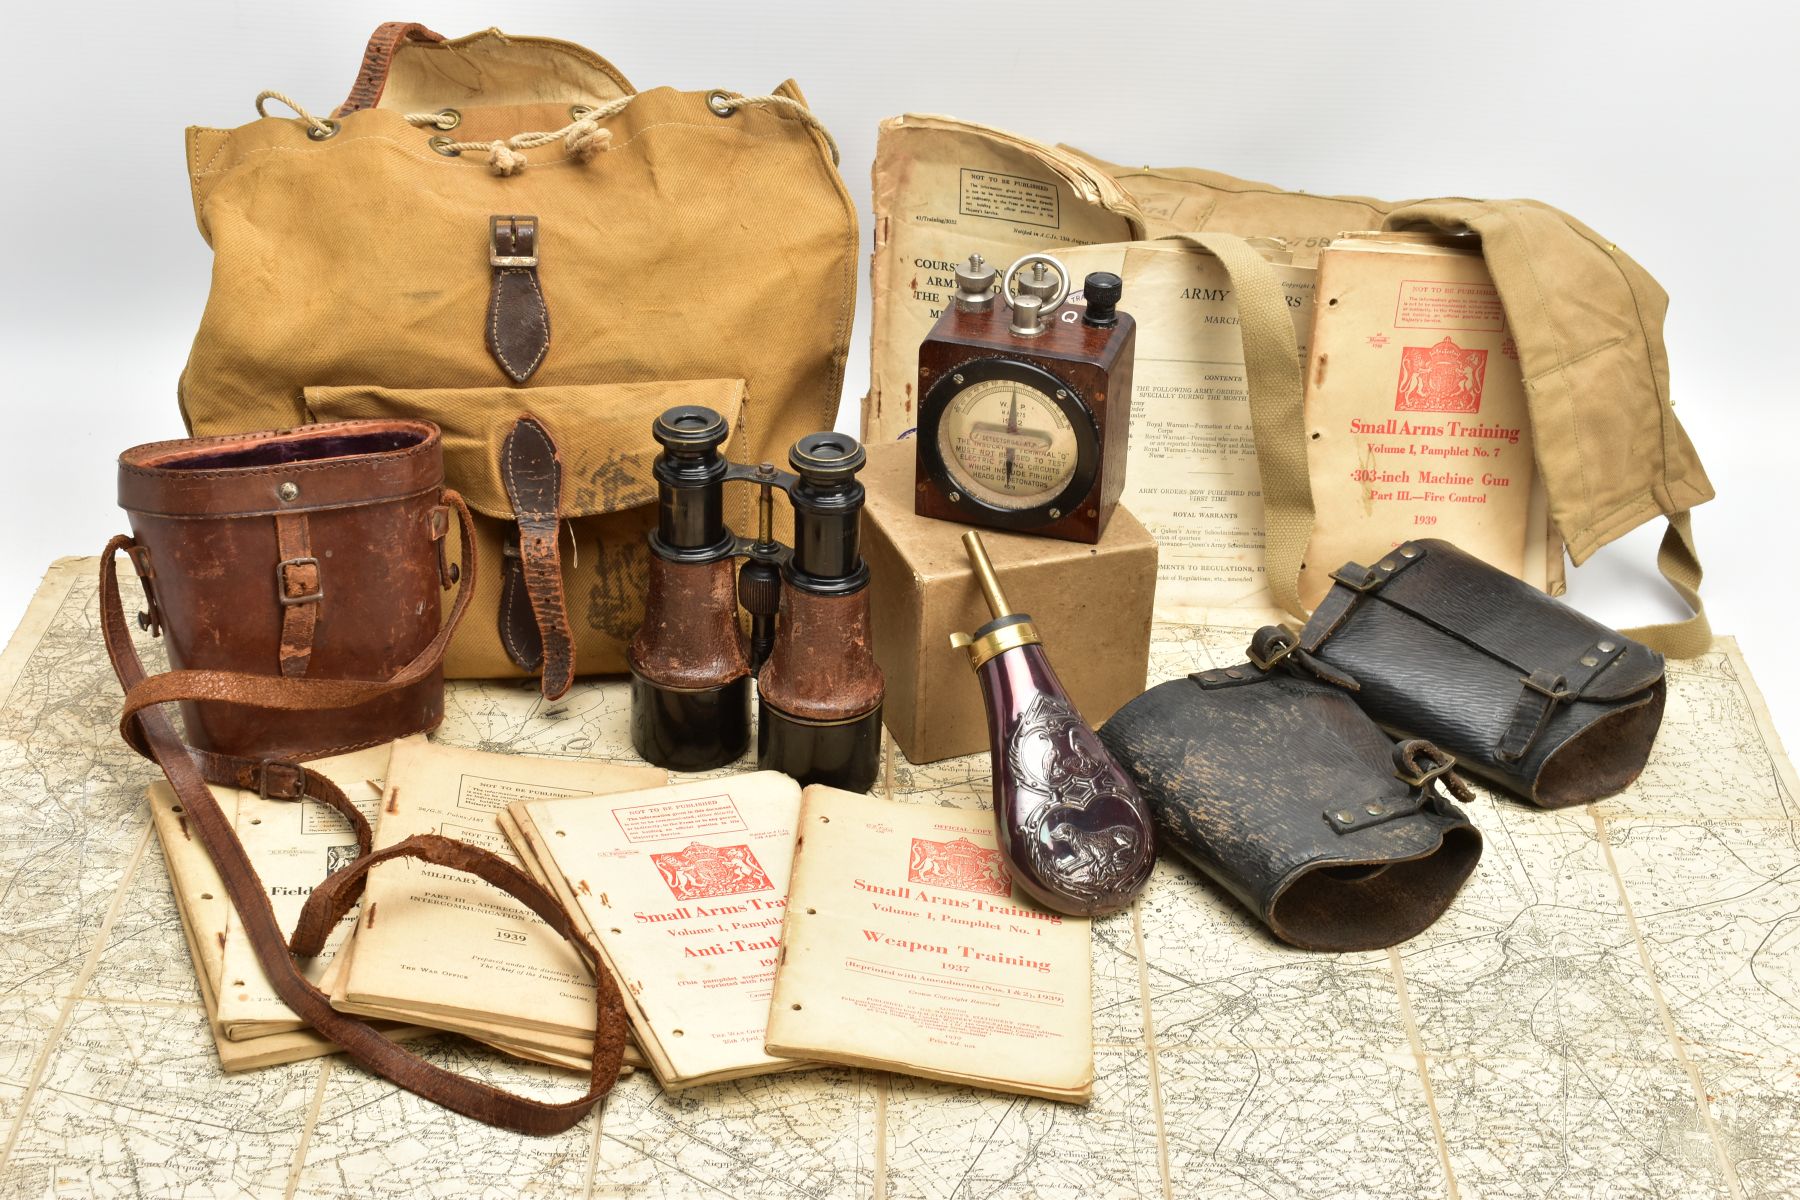 A BOX CONTAINING WWII/POST WWII field equipment, namely a shoulder bag with lots of military